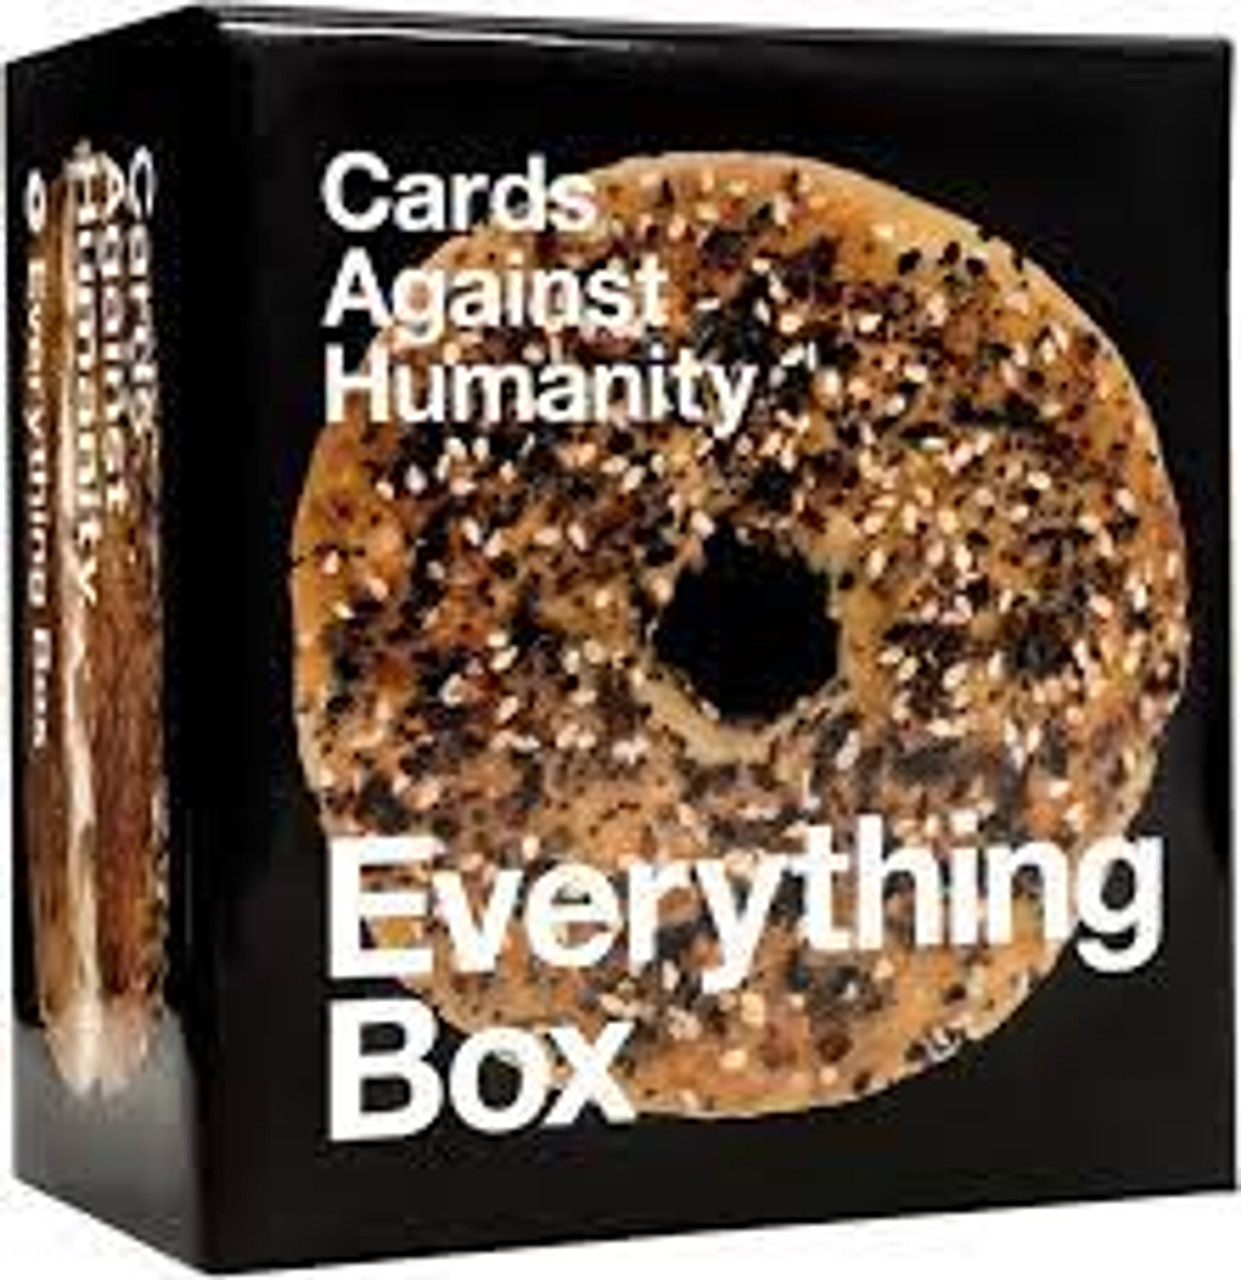 Cards Against Humanity: Everything Box (BGZ115436) - Game Goblins